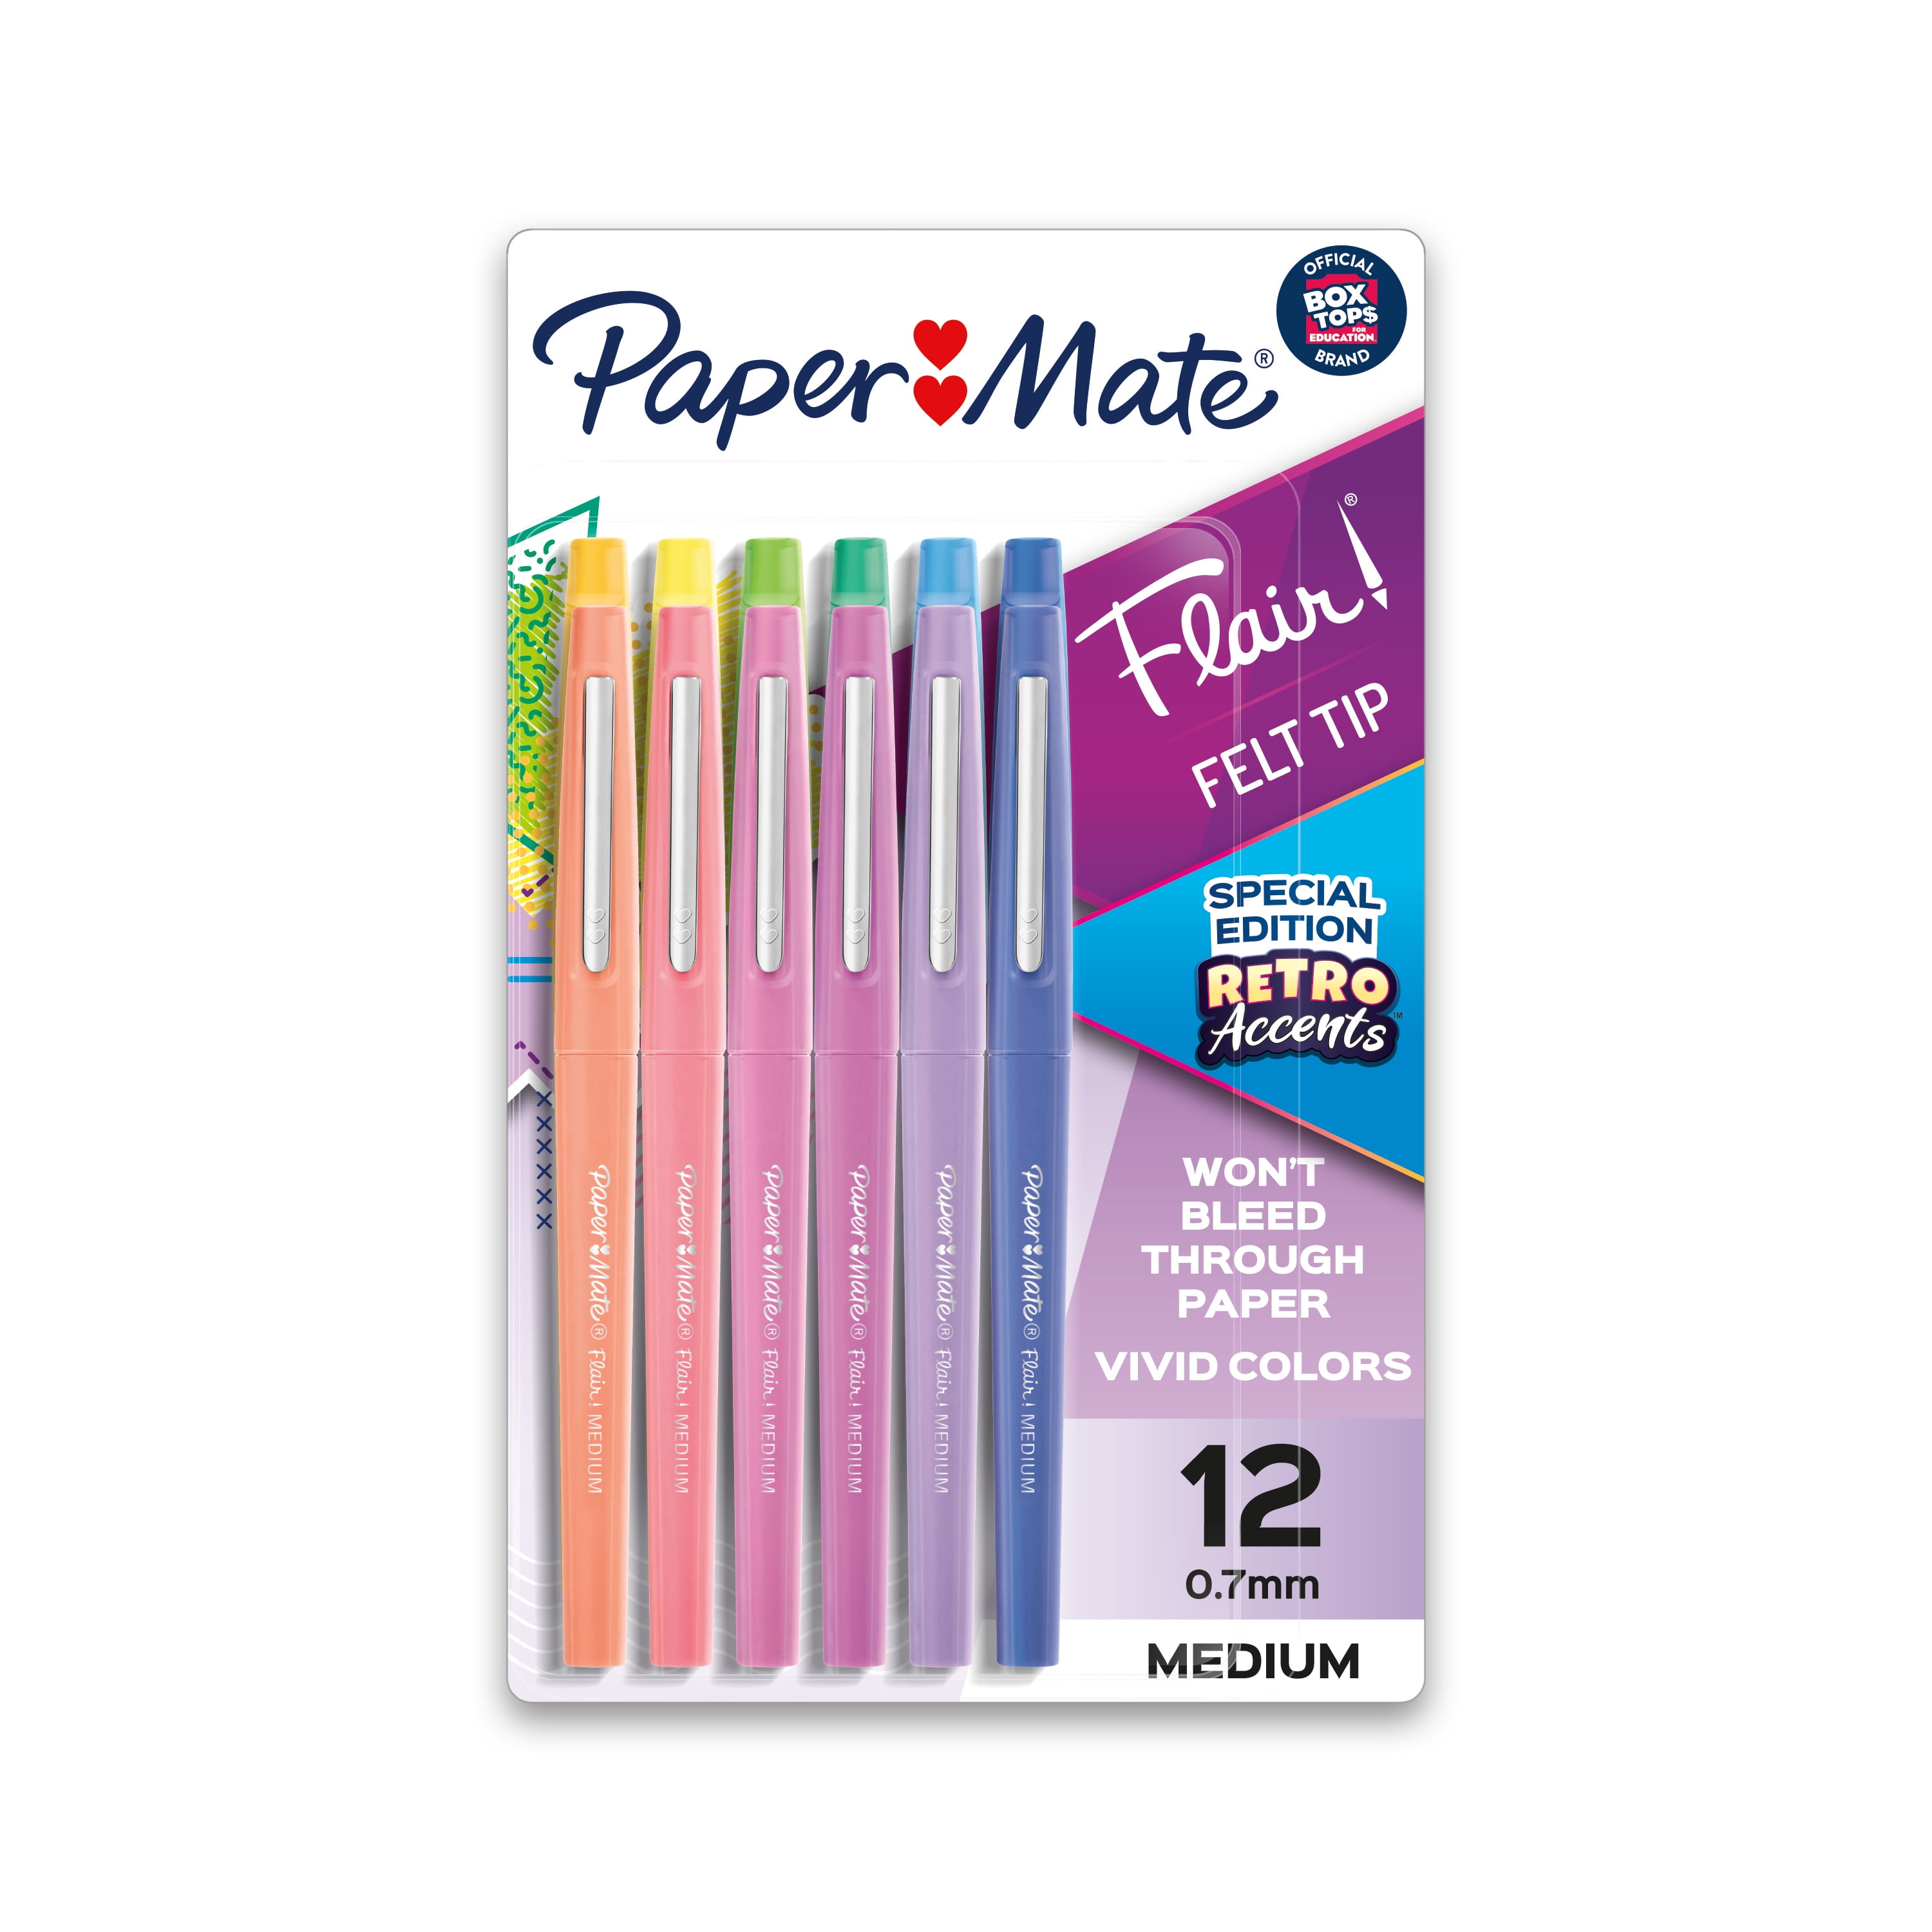 MELIFLUO 50 PASTEL Felt Tip Pens Dual Fineliners 1 count (Pack of